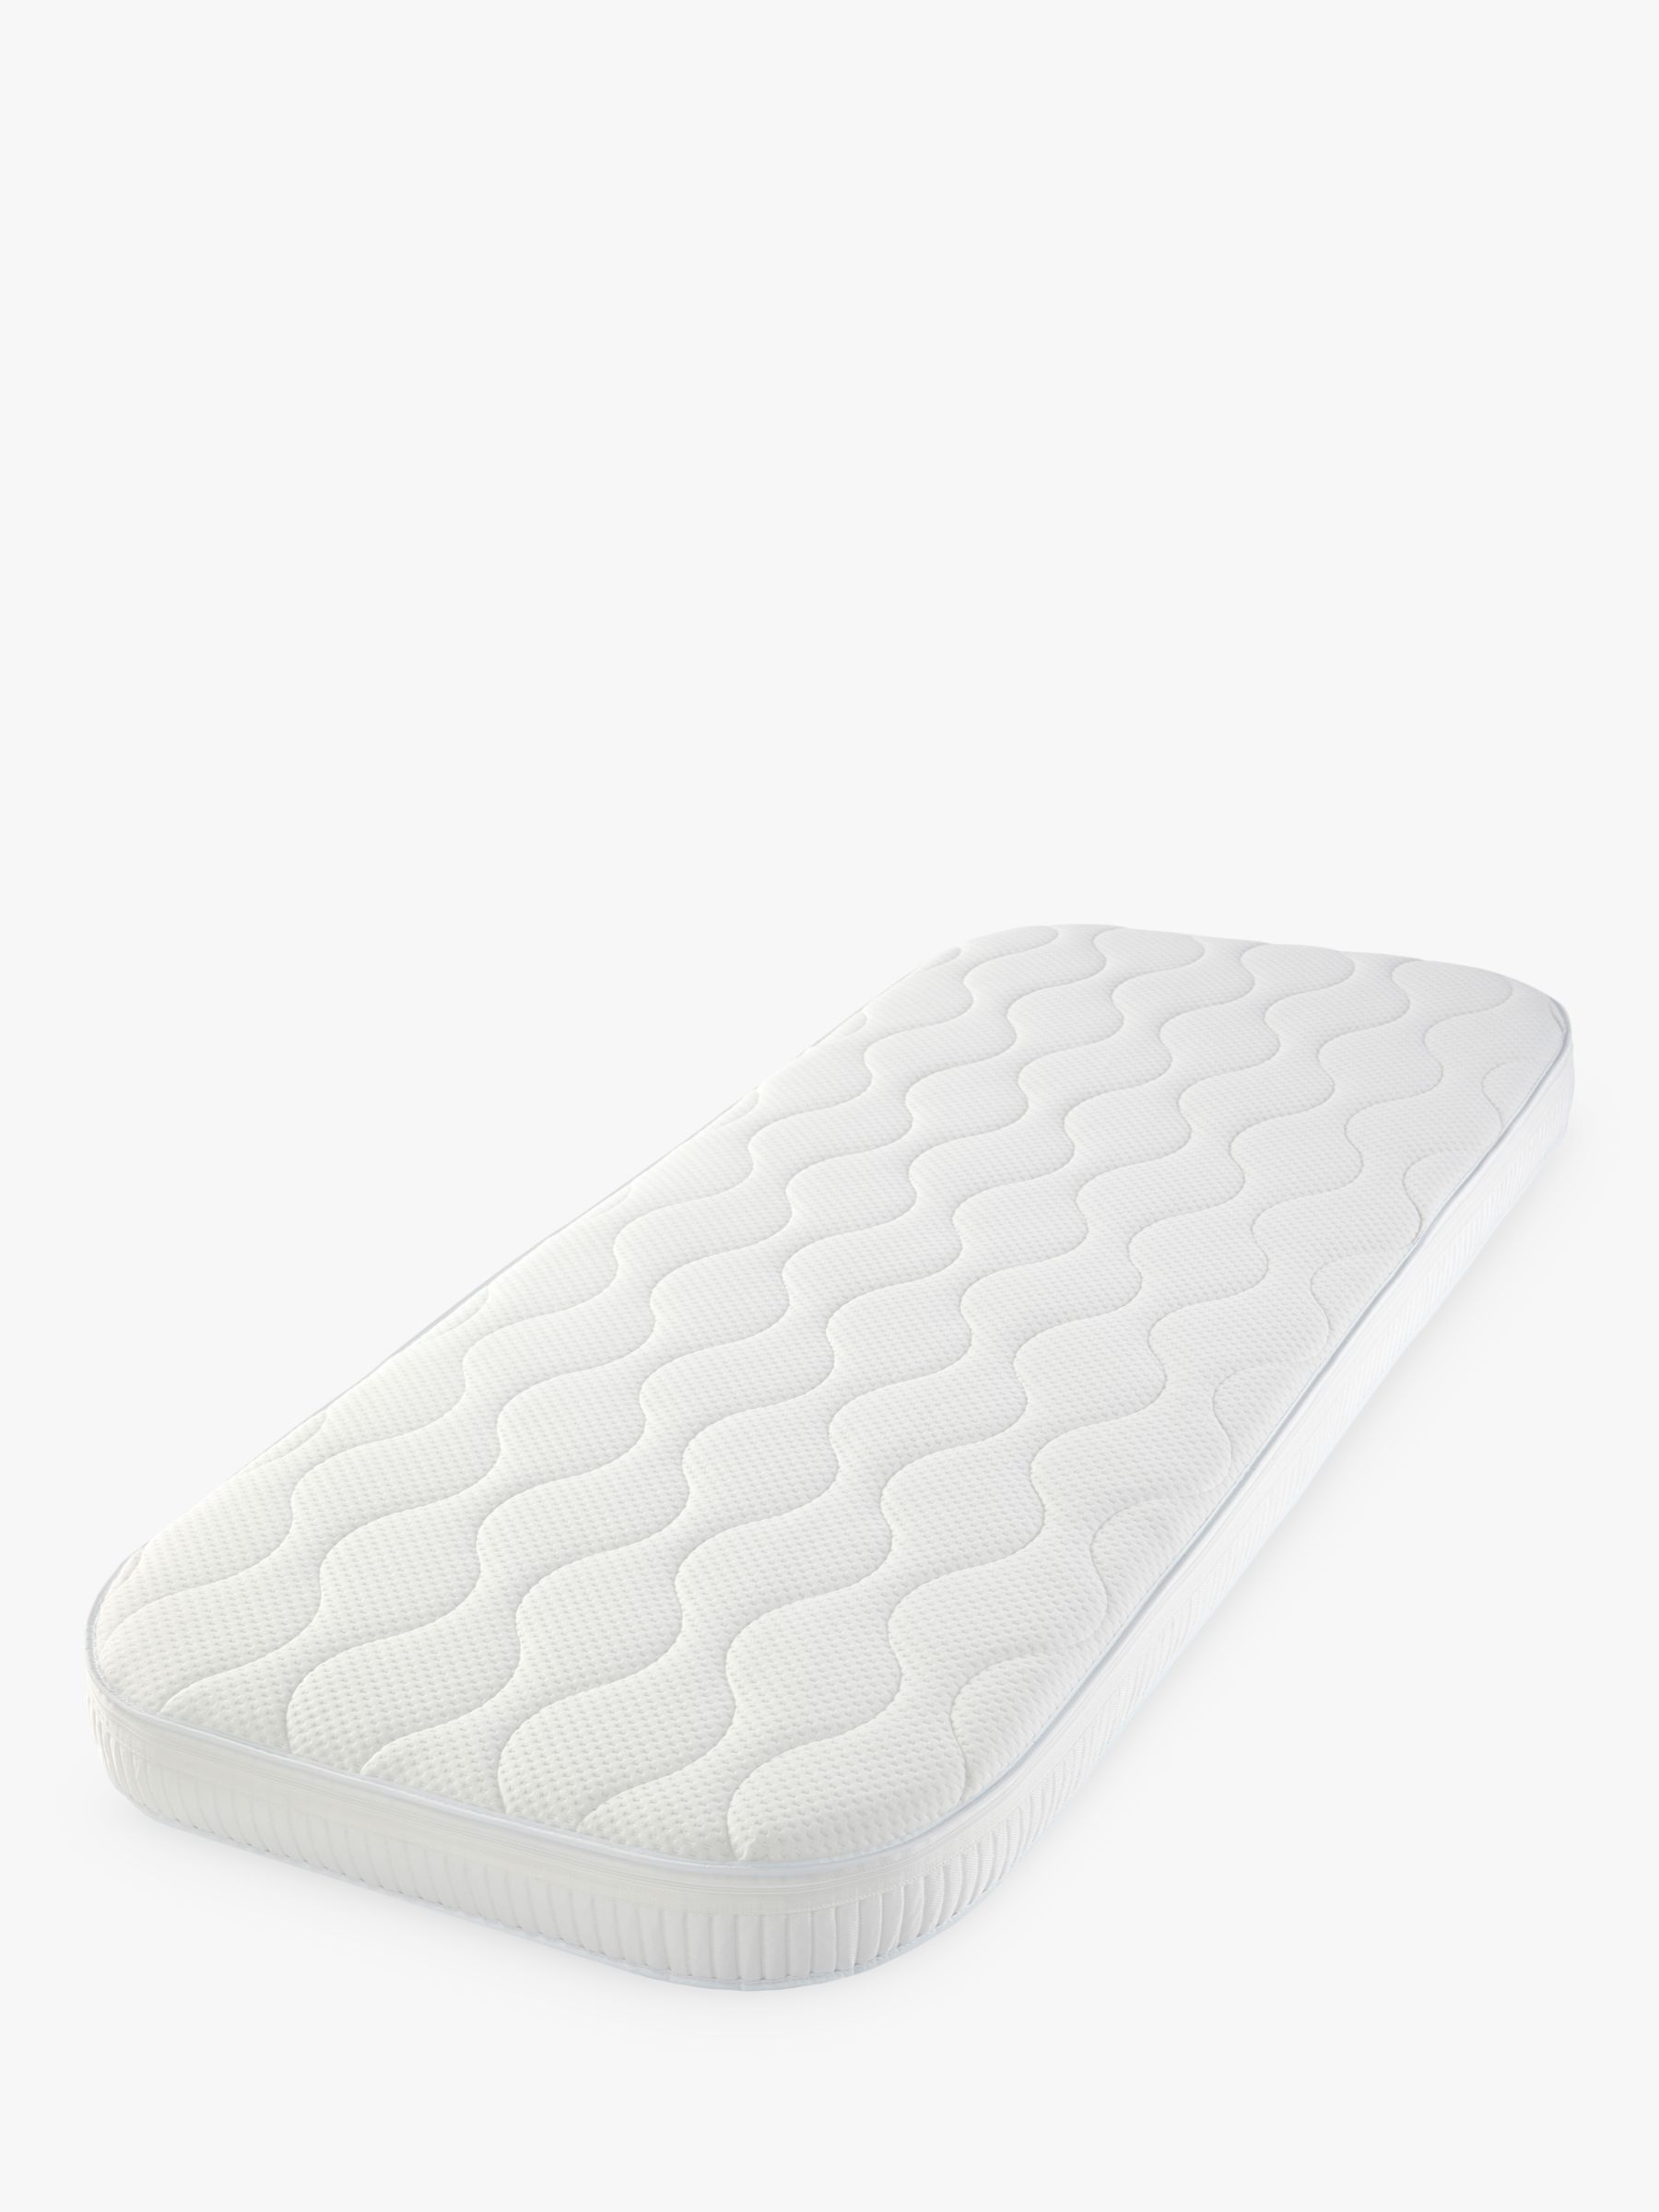 Image of Gaia Baby Serena Pocket Spring Mattress for Complete Sleep Cot 136 x 66cm